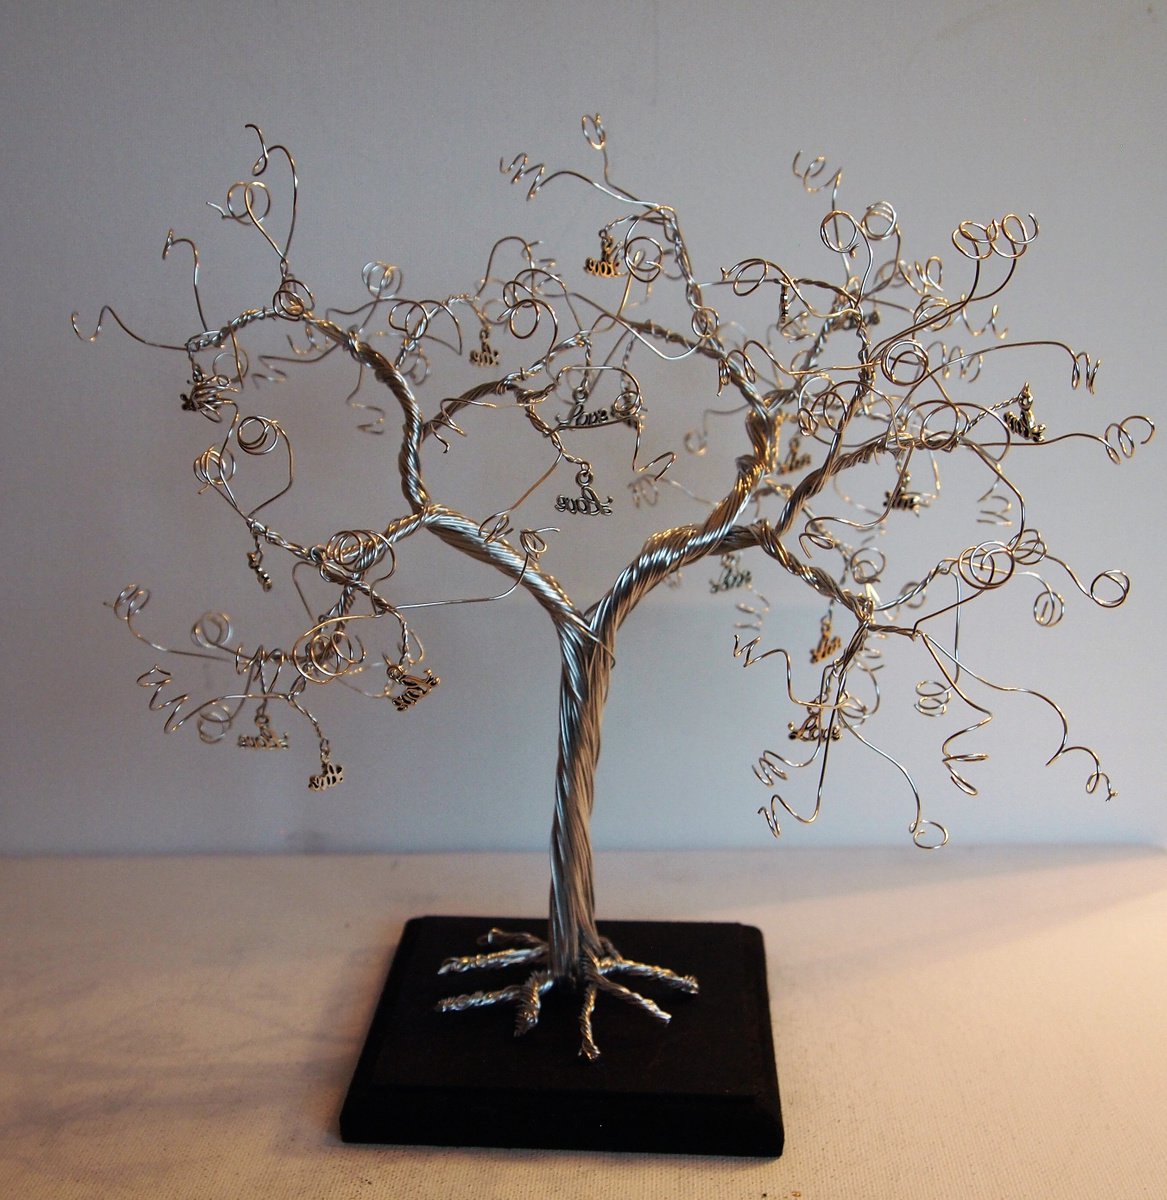 Valentines, Silver wire tree sculpture by Steph Morgan